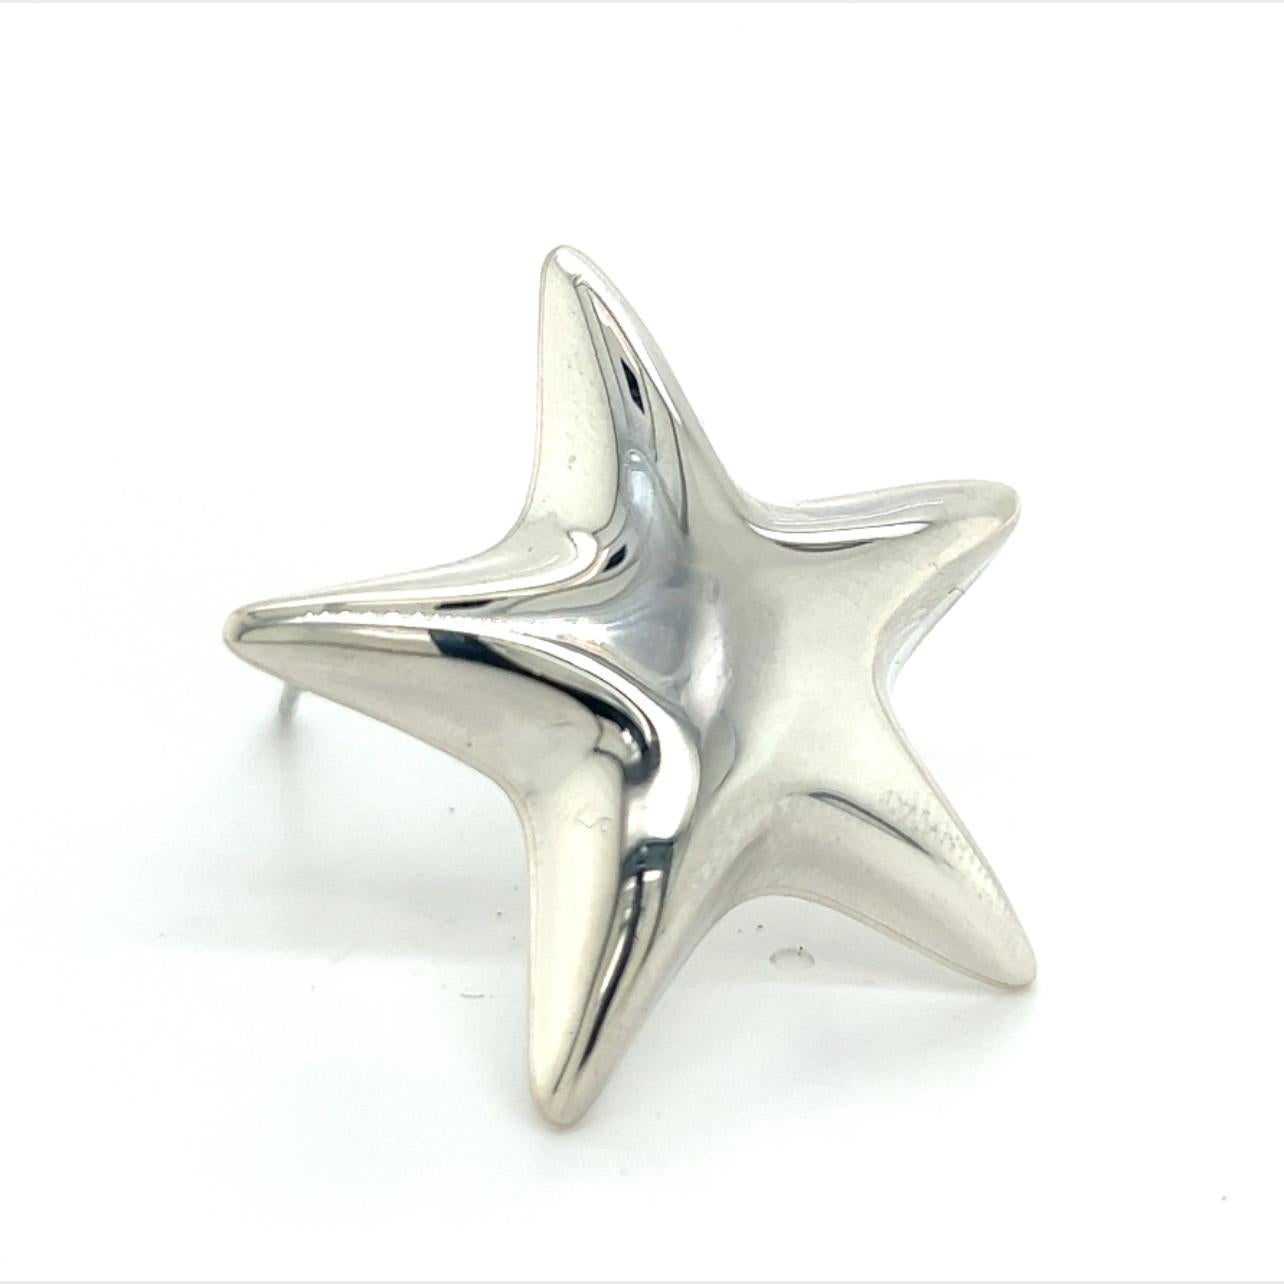 Tiffany & Co Estate Puff Star Brooch Pin Sterling Silver TIF304

These elegant Authentic Tiffany & Co star earrings have a weight of 10.6 Grams.

TRUSTED SELLER SINCE 2002

PLEASE SEE OUR HUNDREDS OF POSITIVE FEEDBACKS FROM OUR CLIENTS!!

FREE